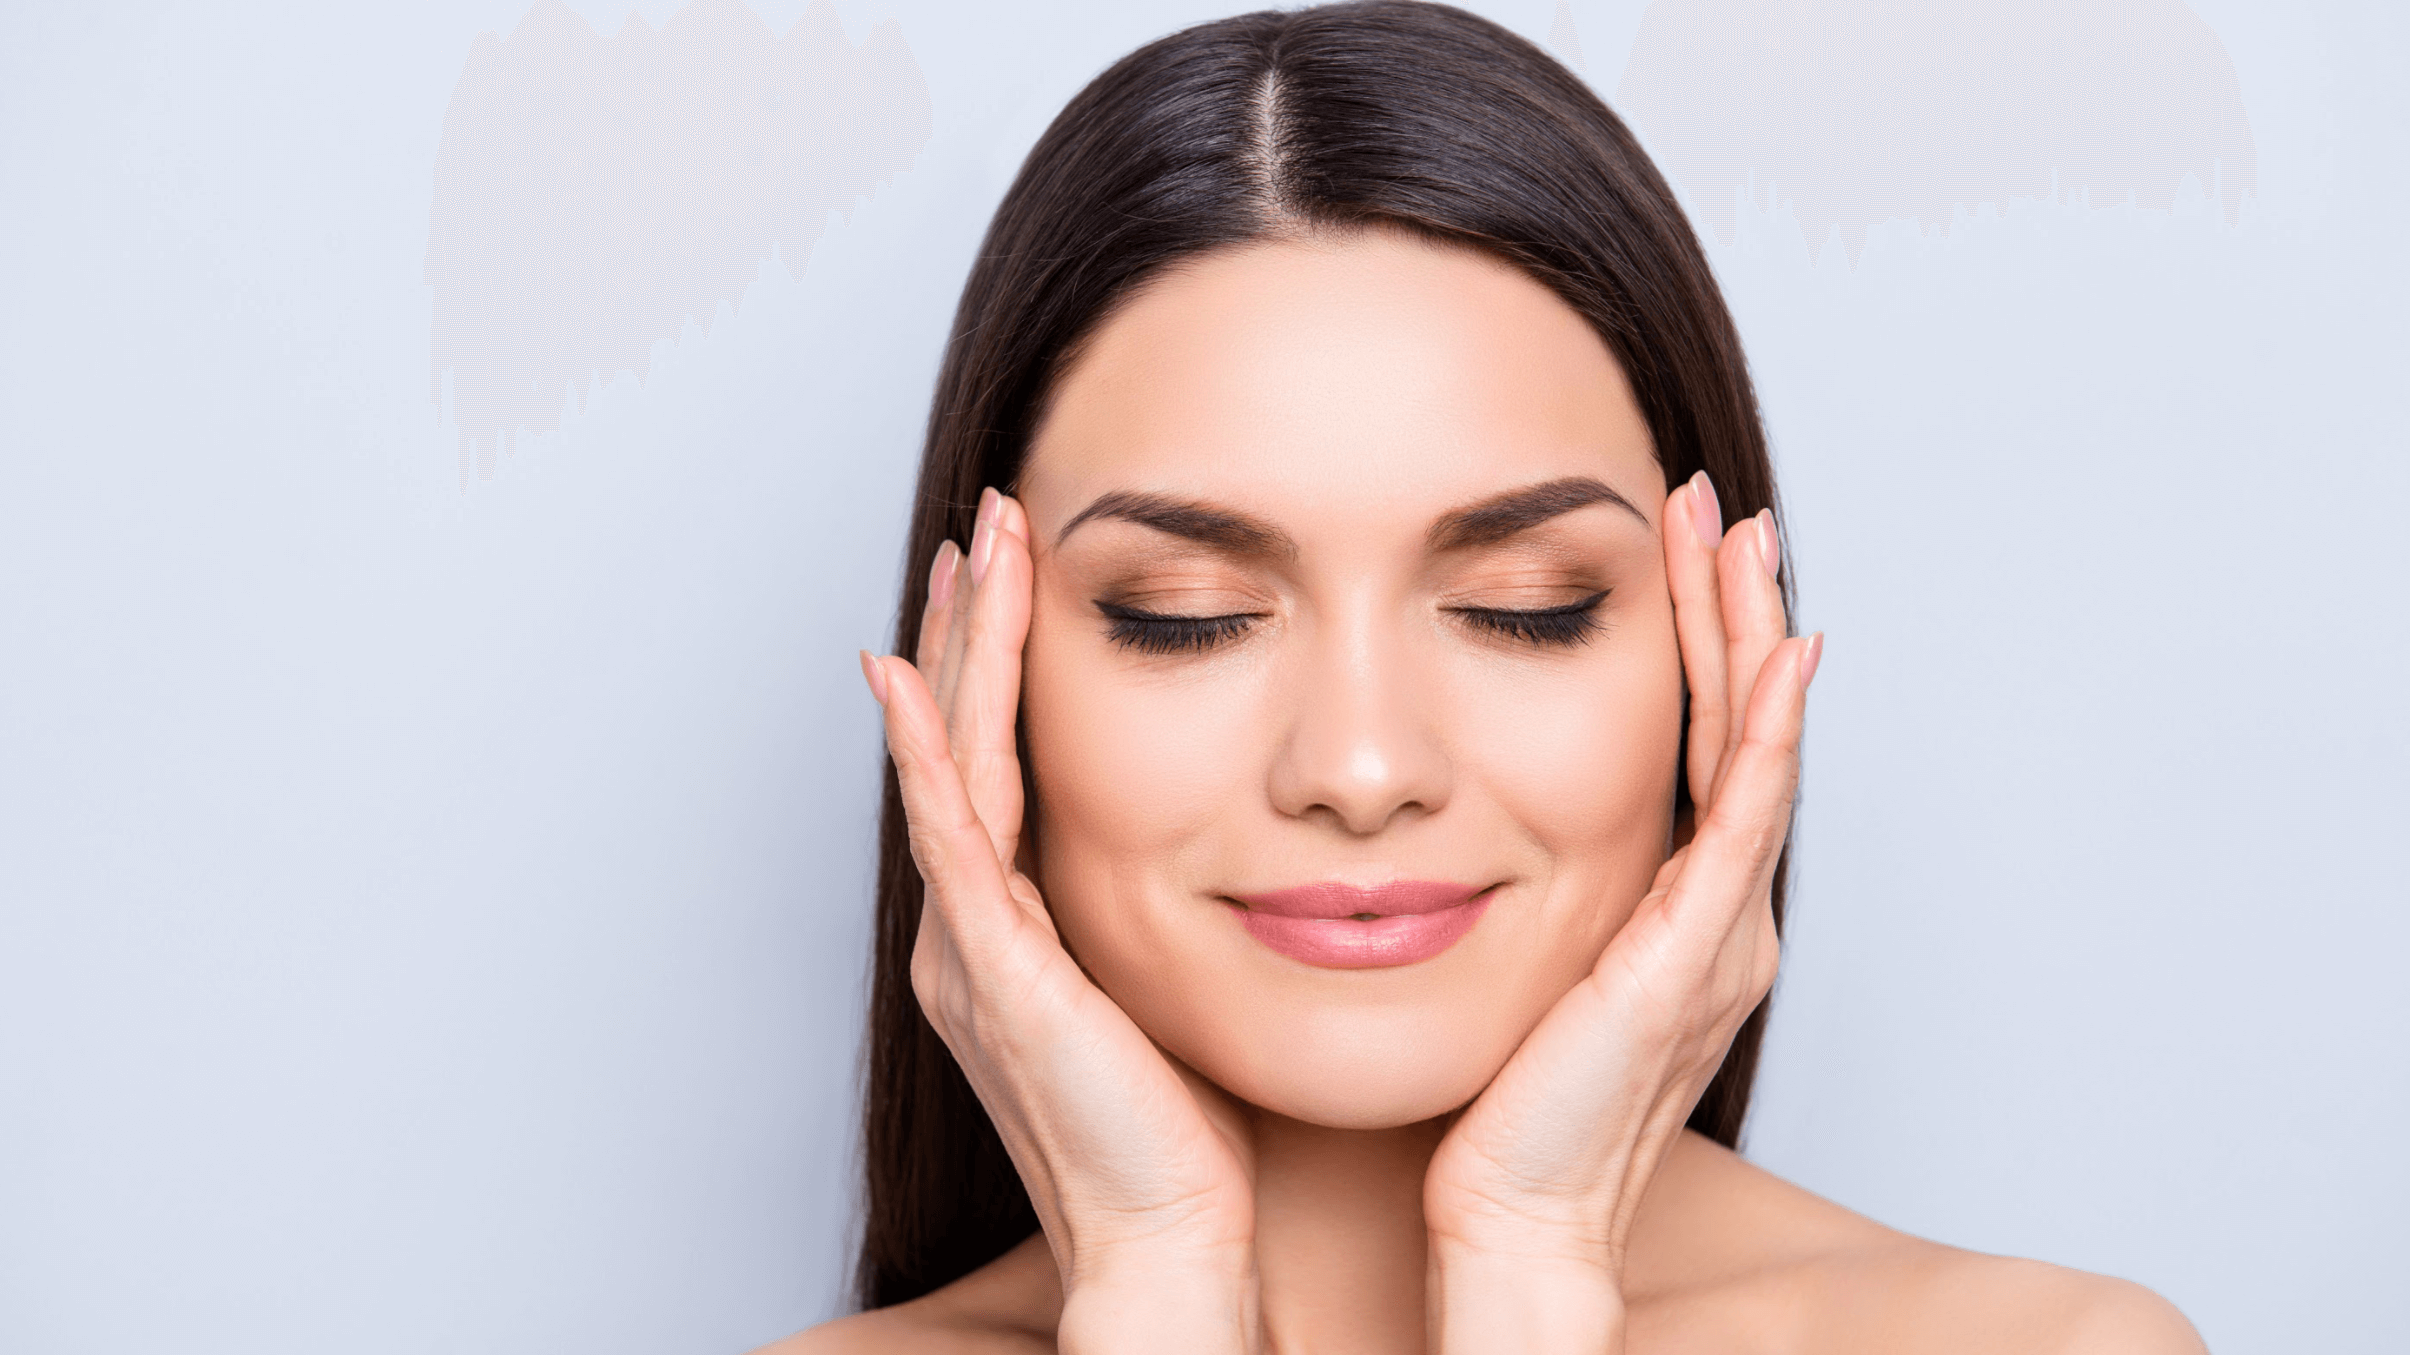 How To Prep Your Skin for an IPL Photofacial